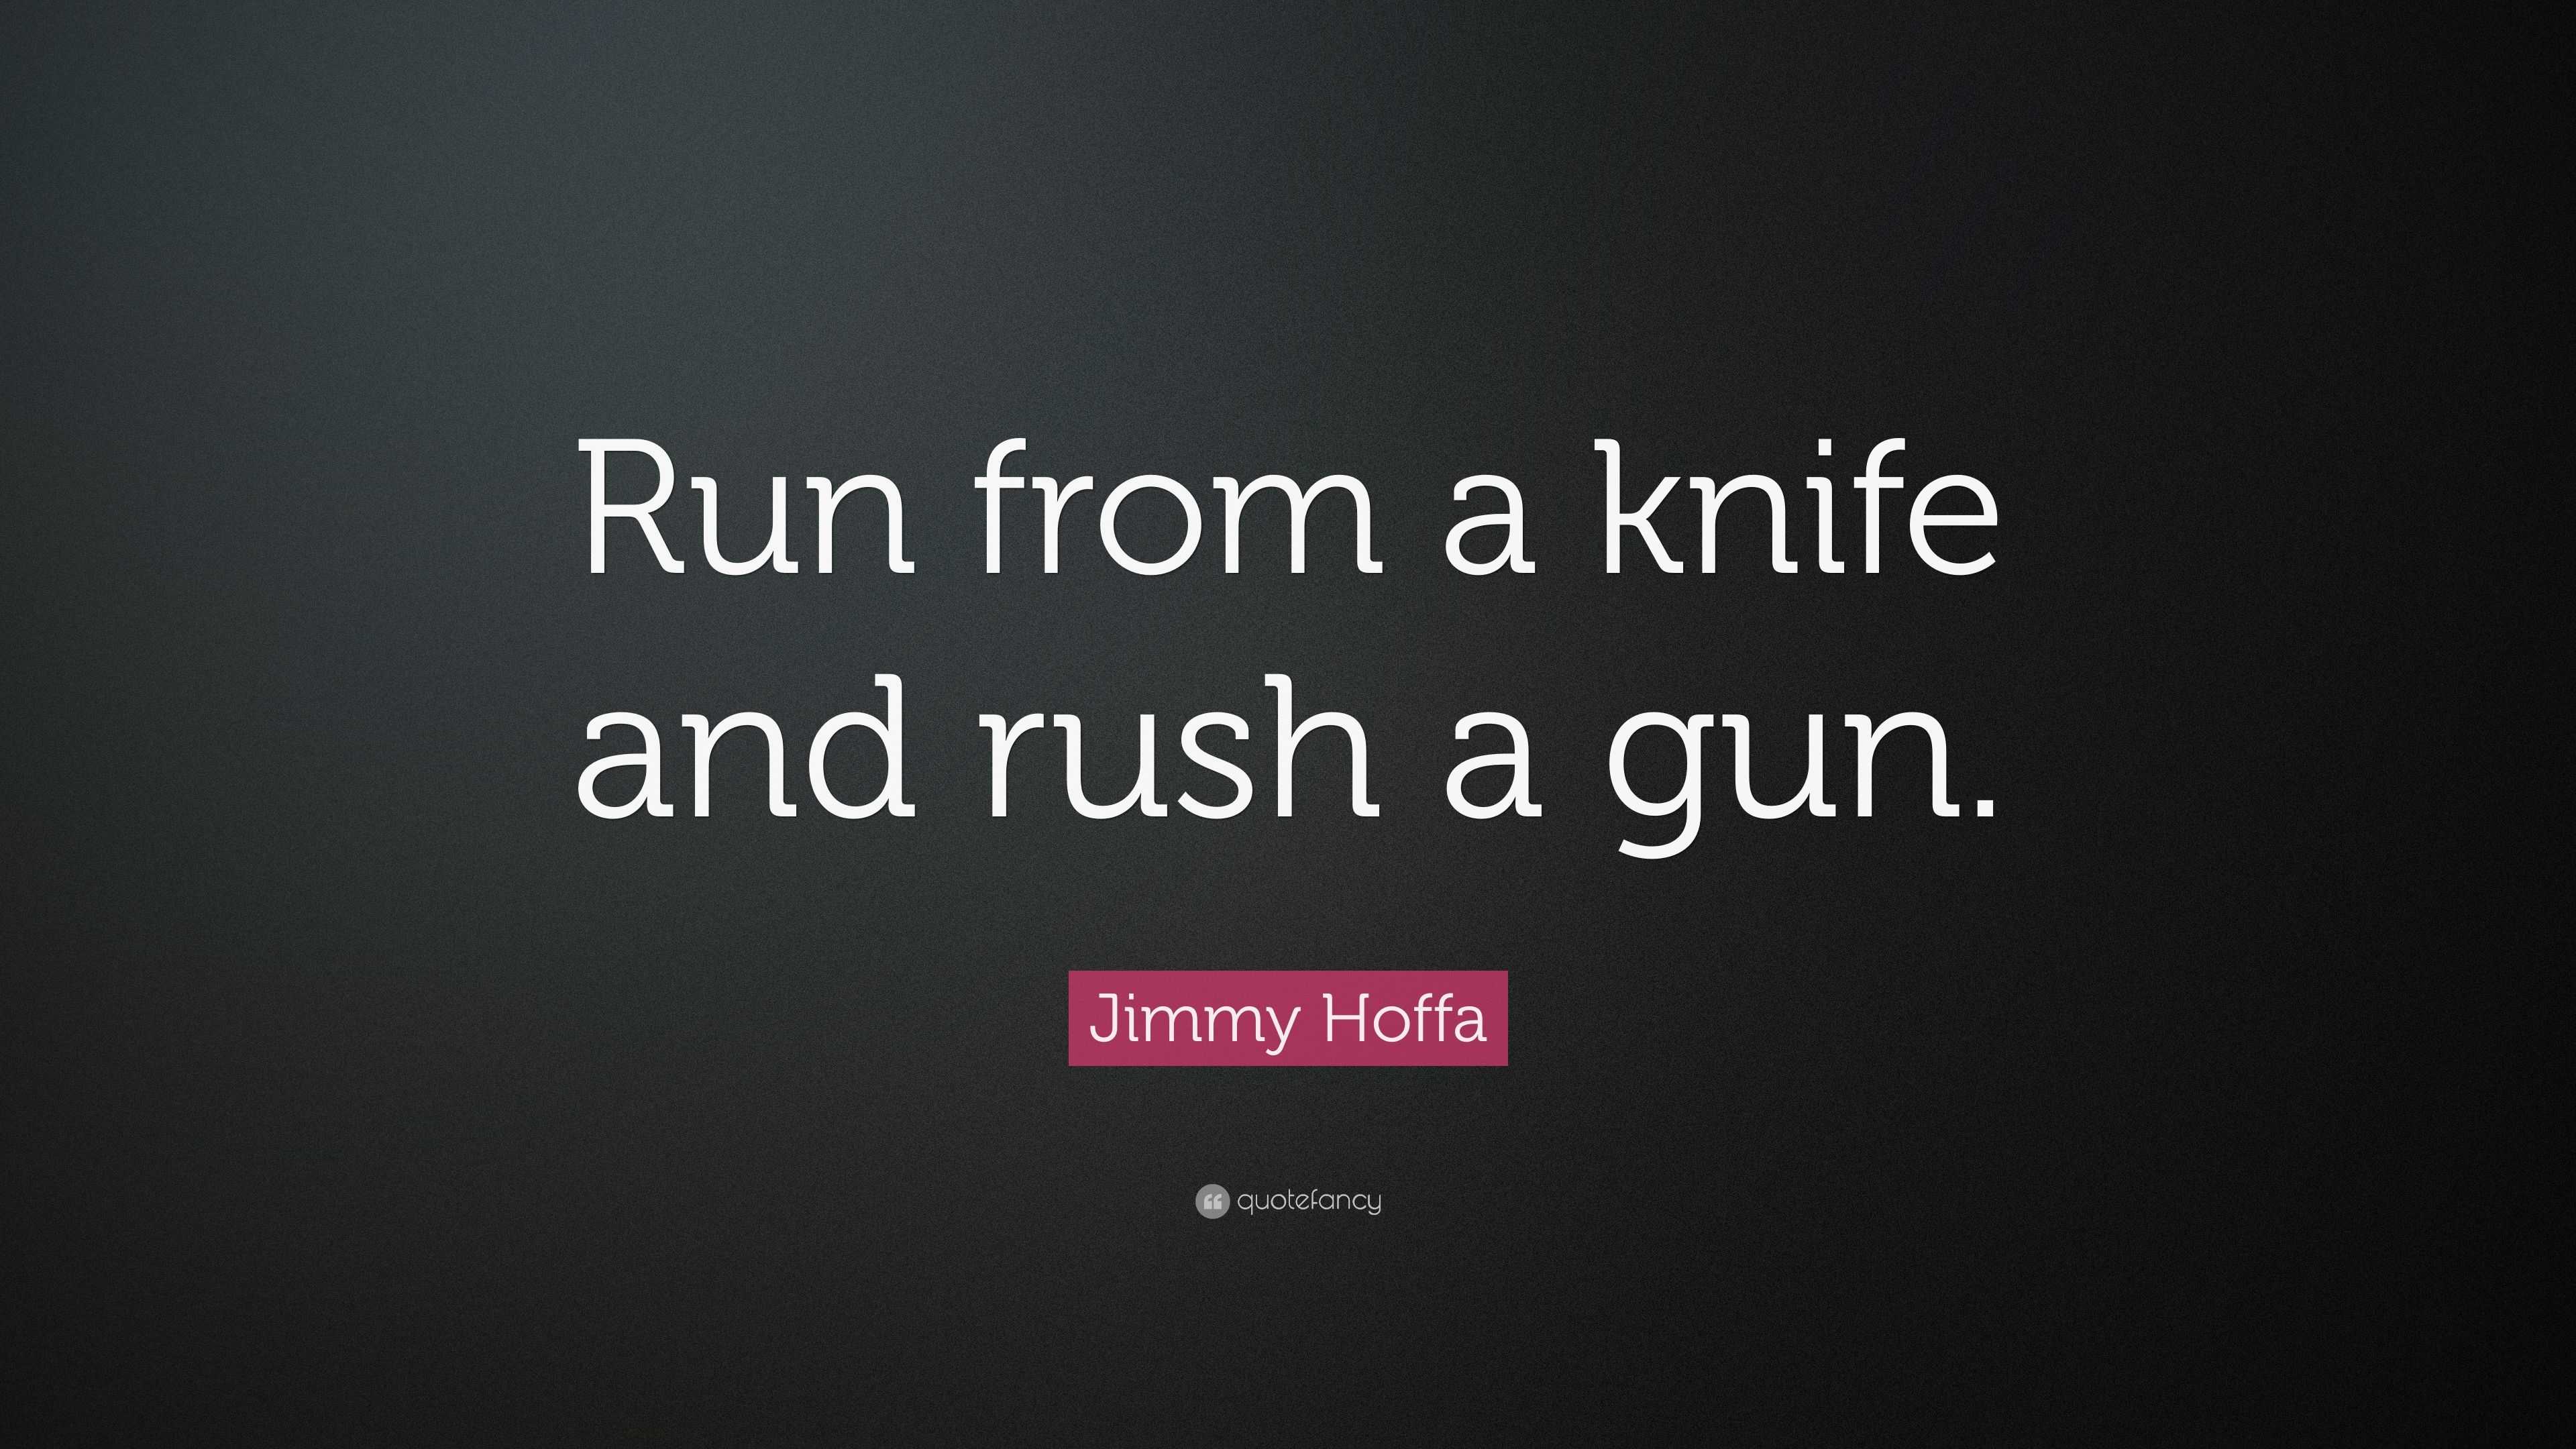 Jimmy Hoffa Quote: “Run from a knife and rush a gun.”